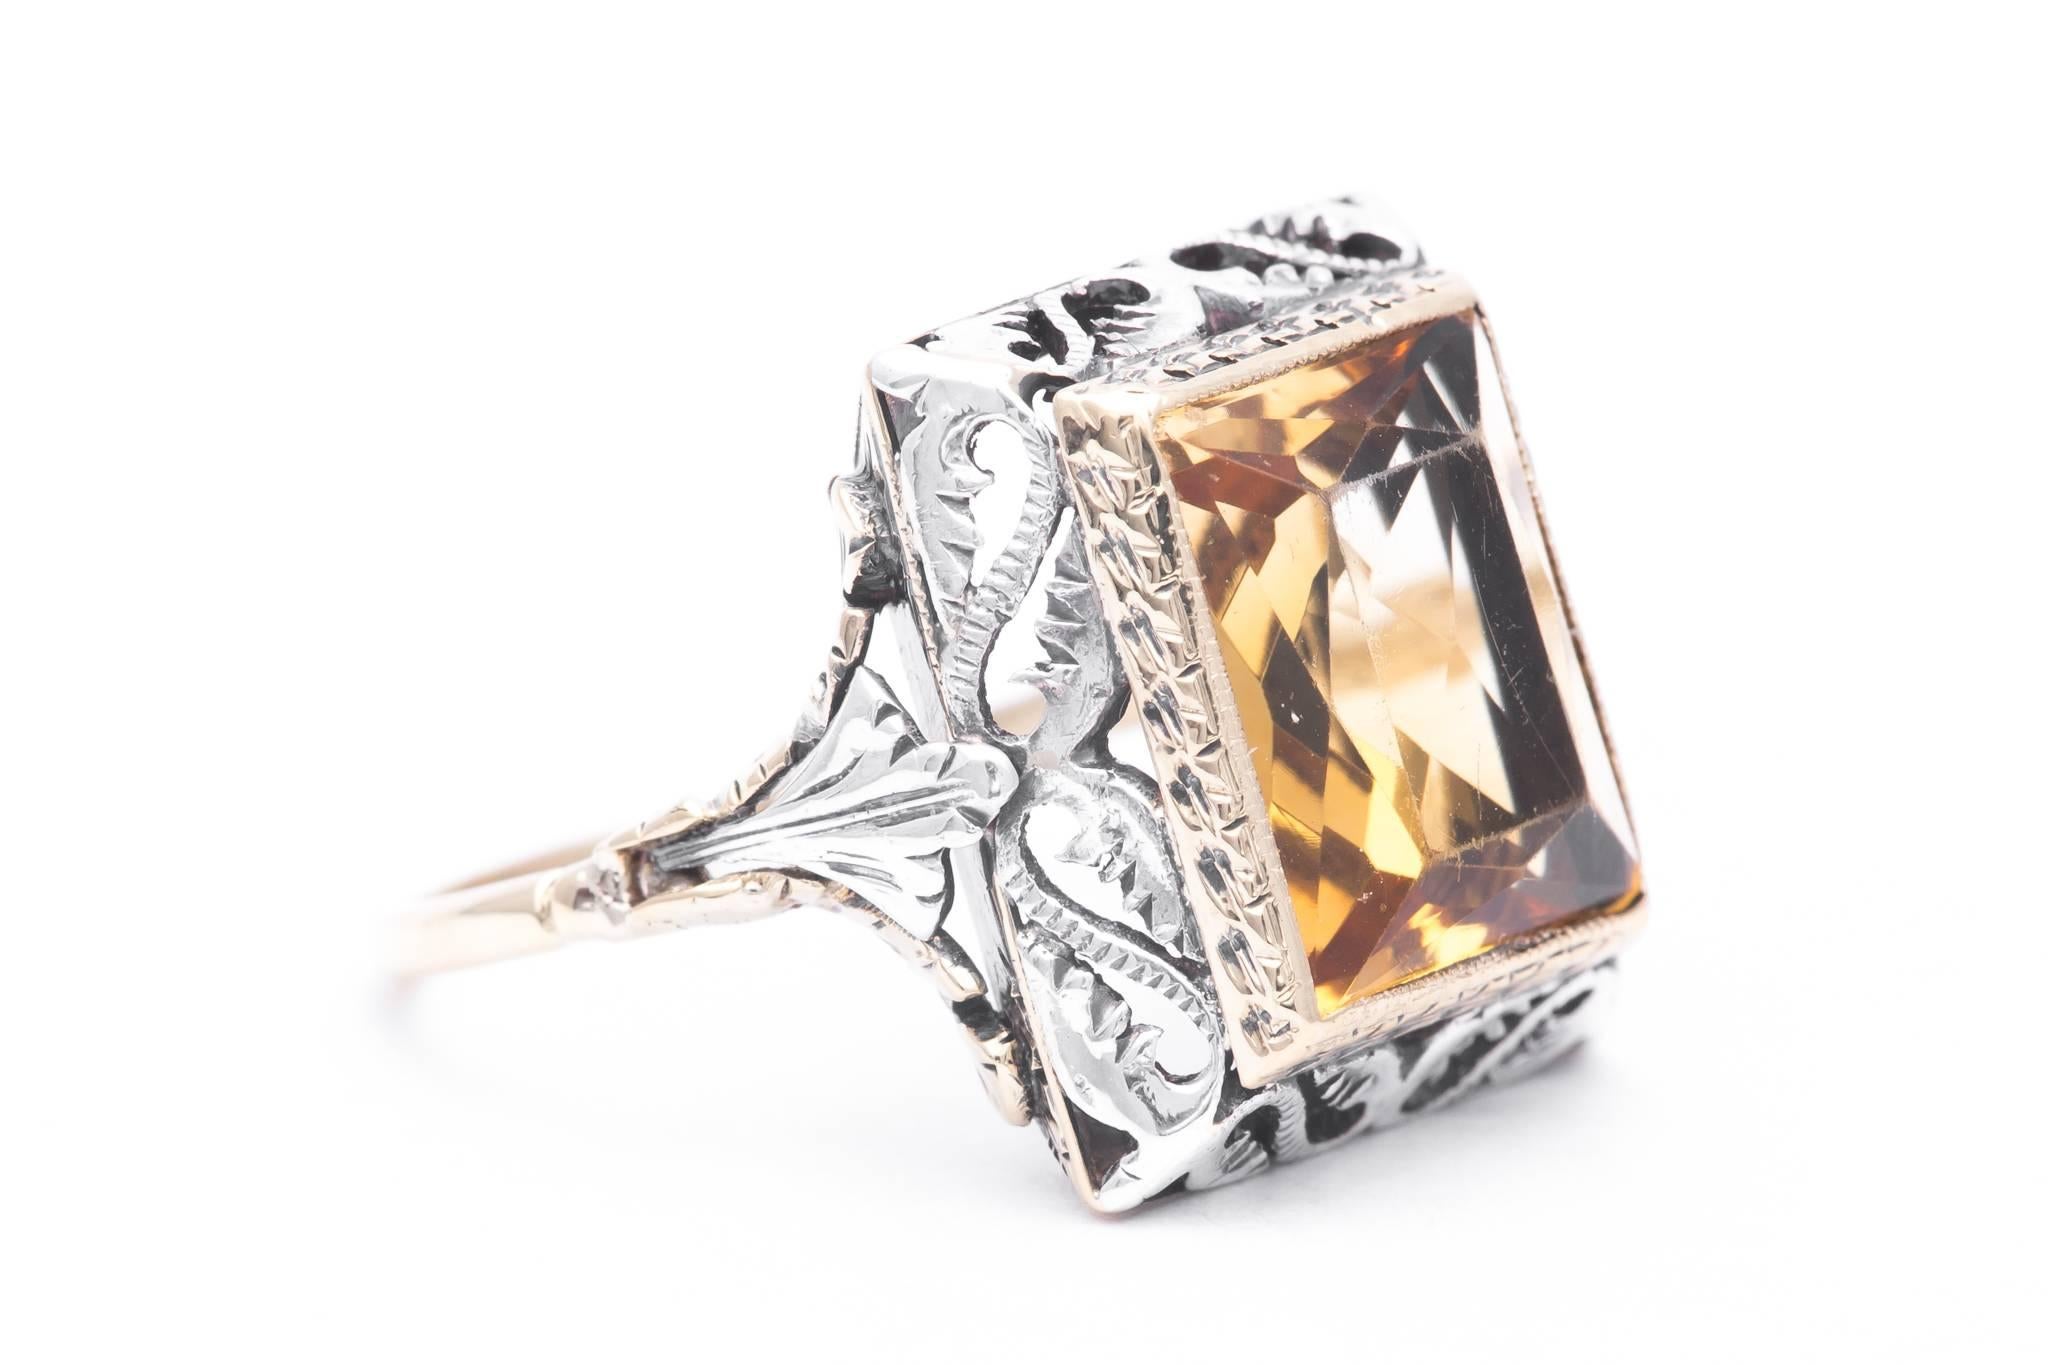 An art deco period citrine filigree ring in yellow gold and silver.  Featuring a rectangular cut citrine this ring features hand carving and hand pierced elaborate filigree work throughout.

Grading as VVS clarity and beautiful golden yellow, the